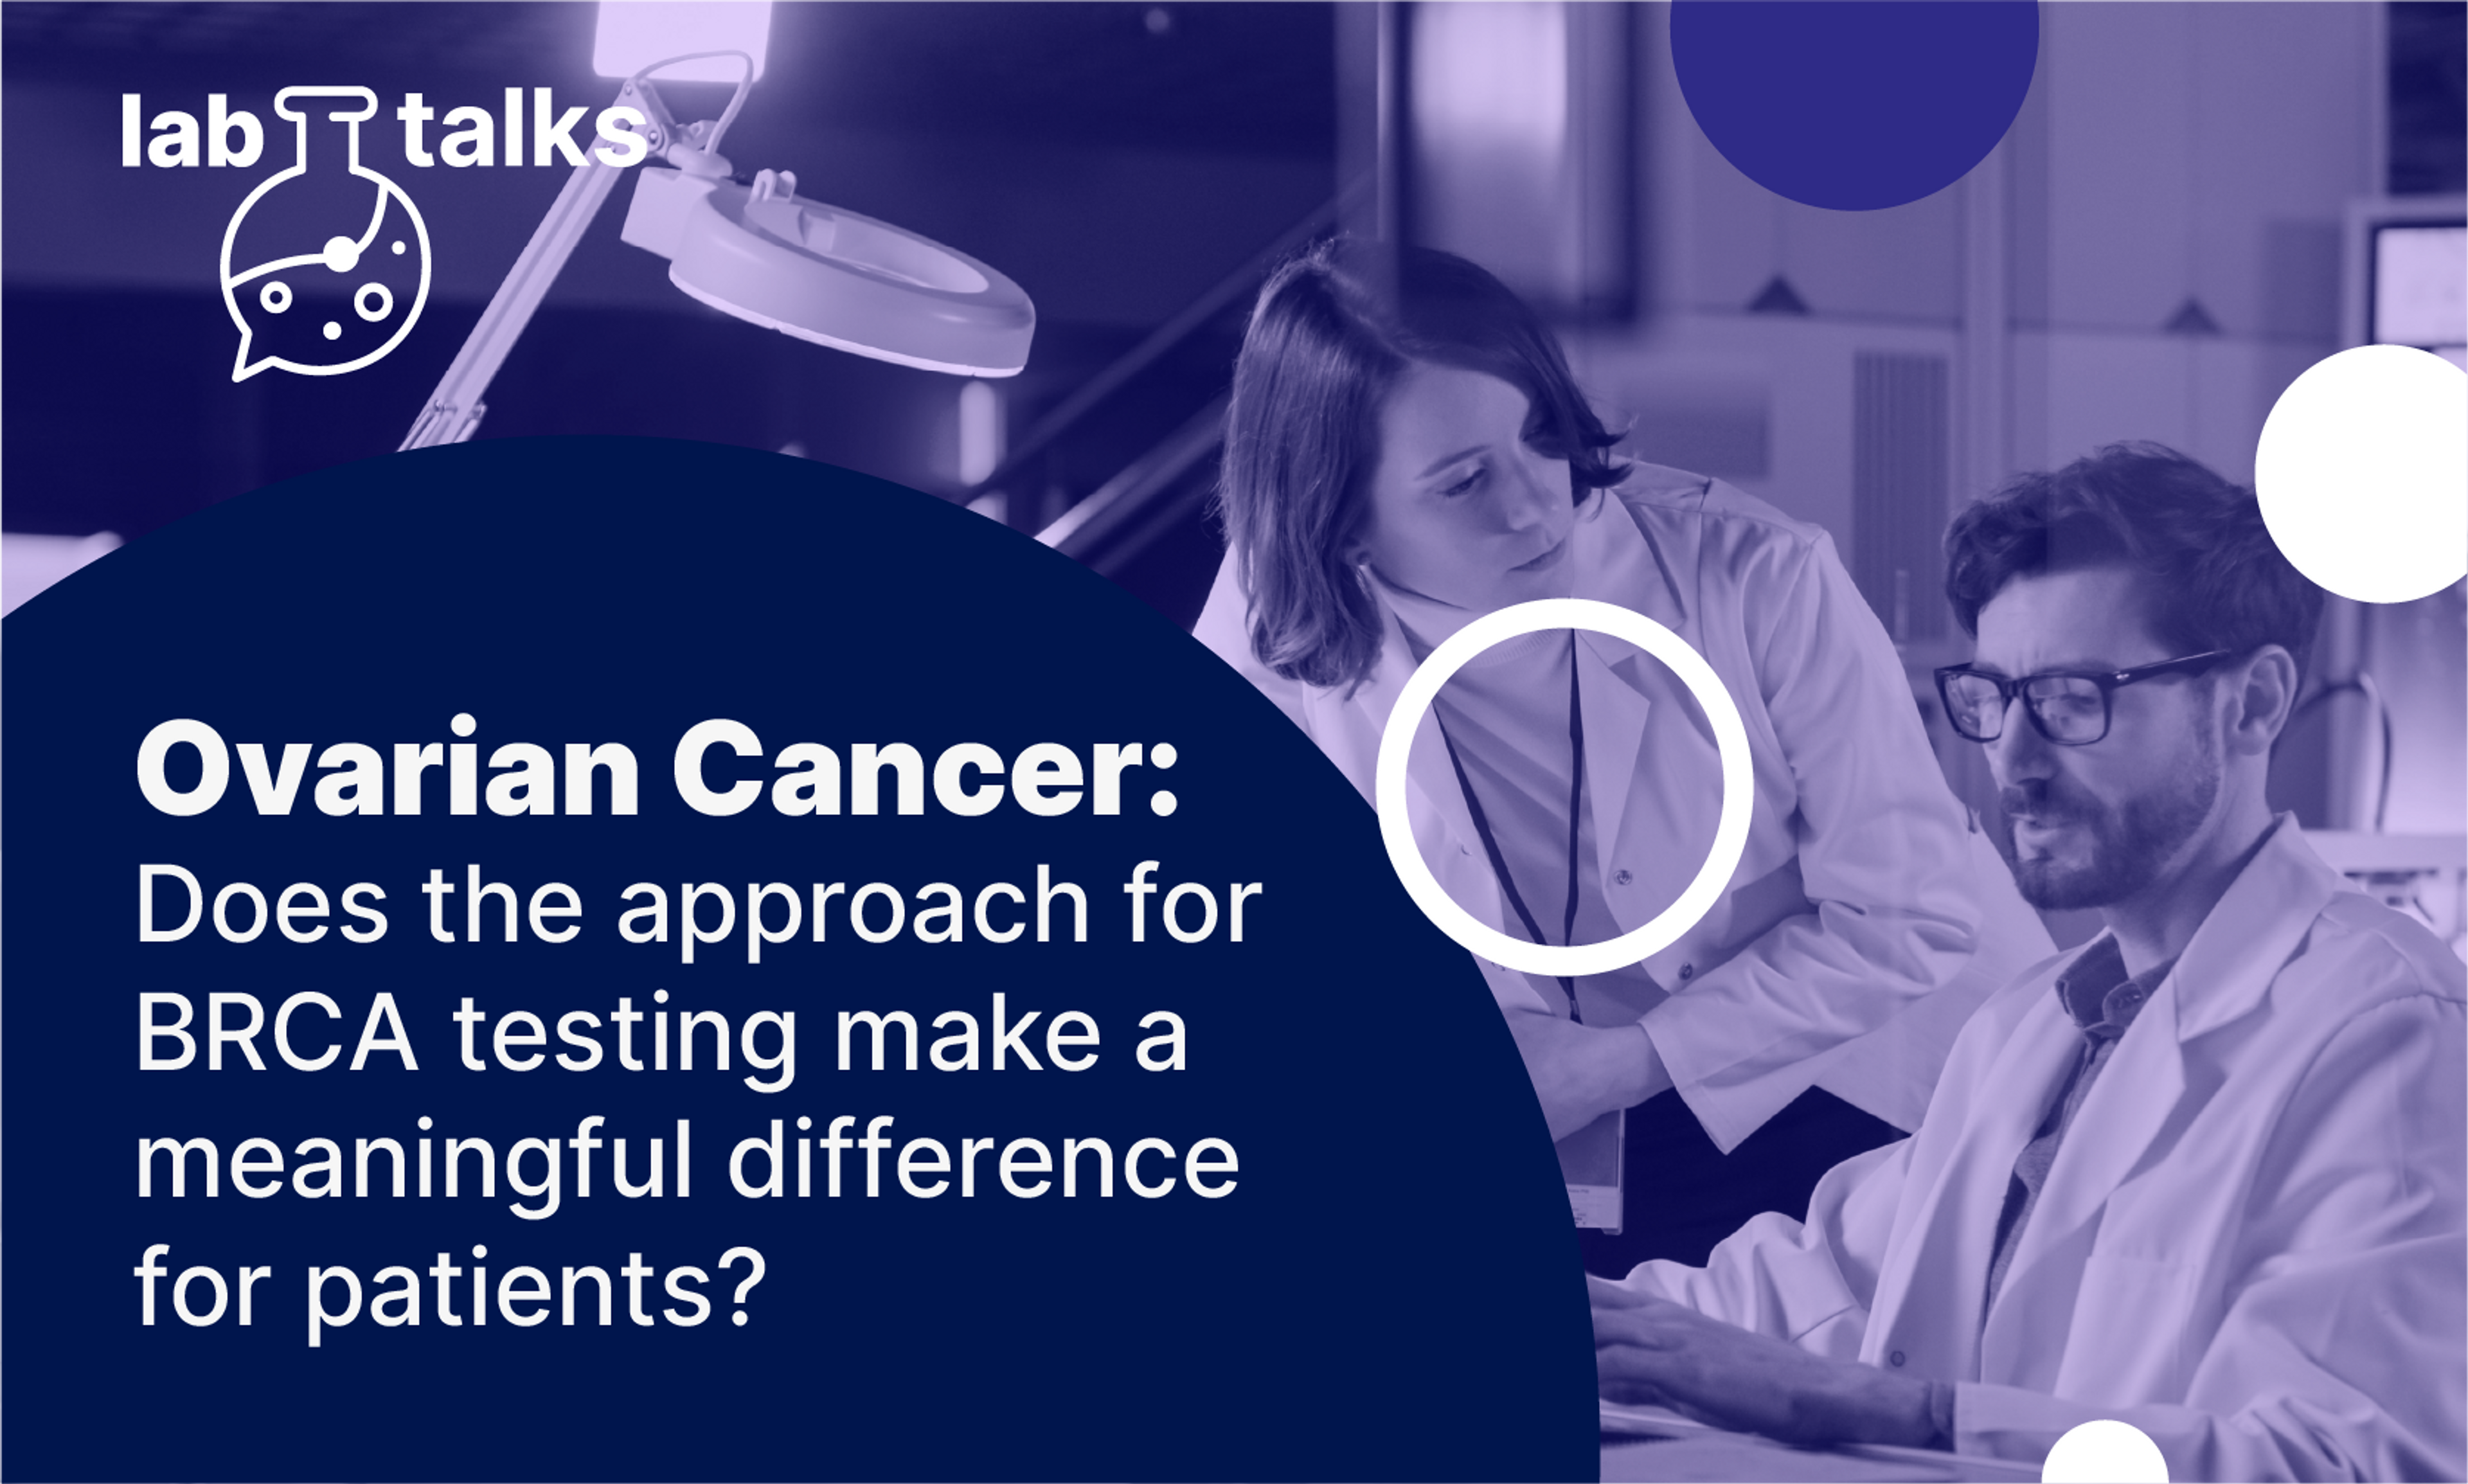 Lab Talk "Ovarian Cancer: Does the approach for BRCA testing make a meaningful difference for patients?